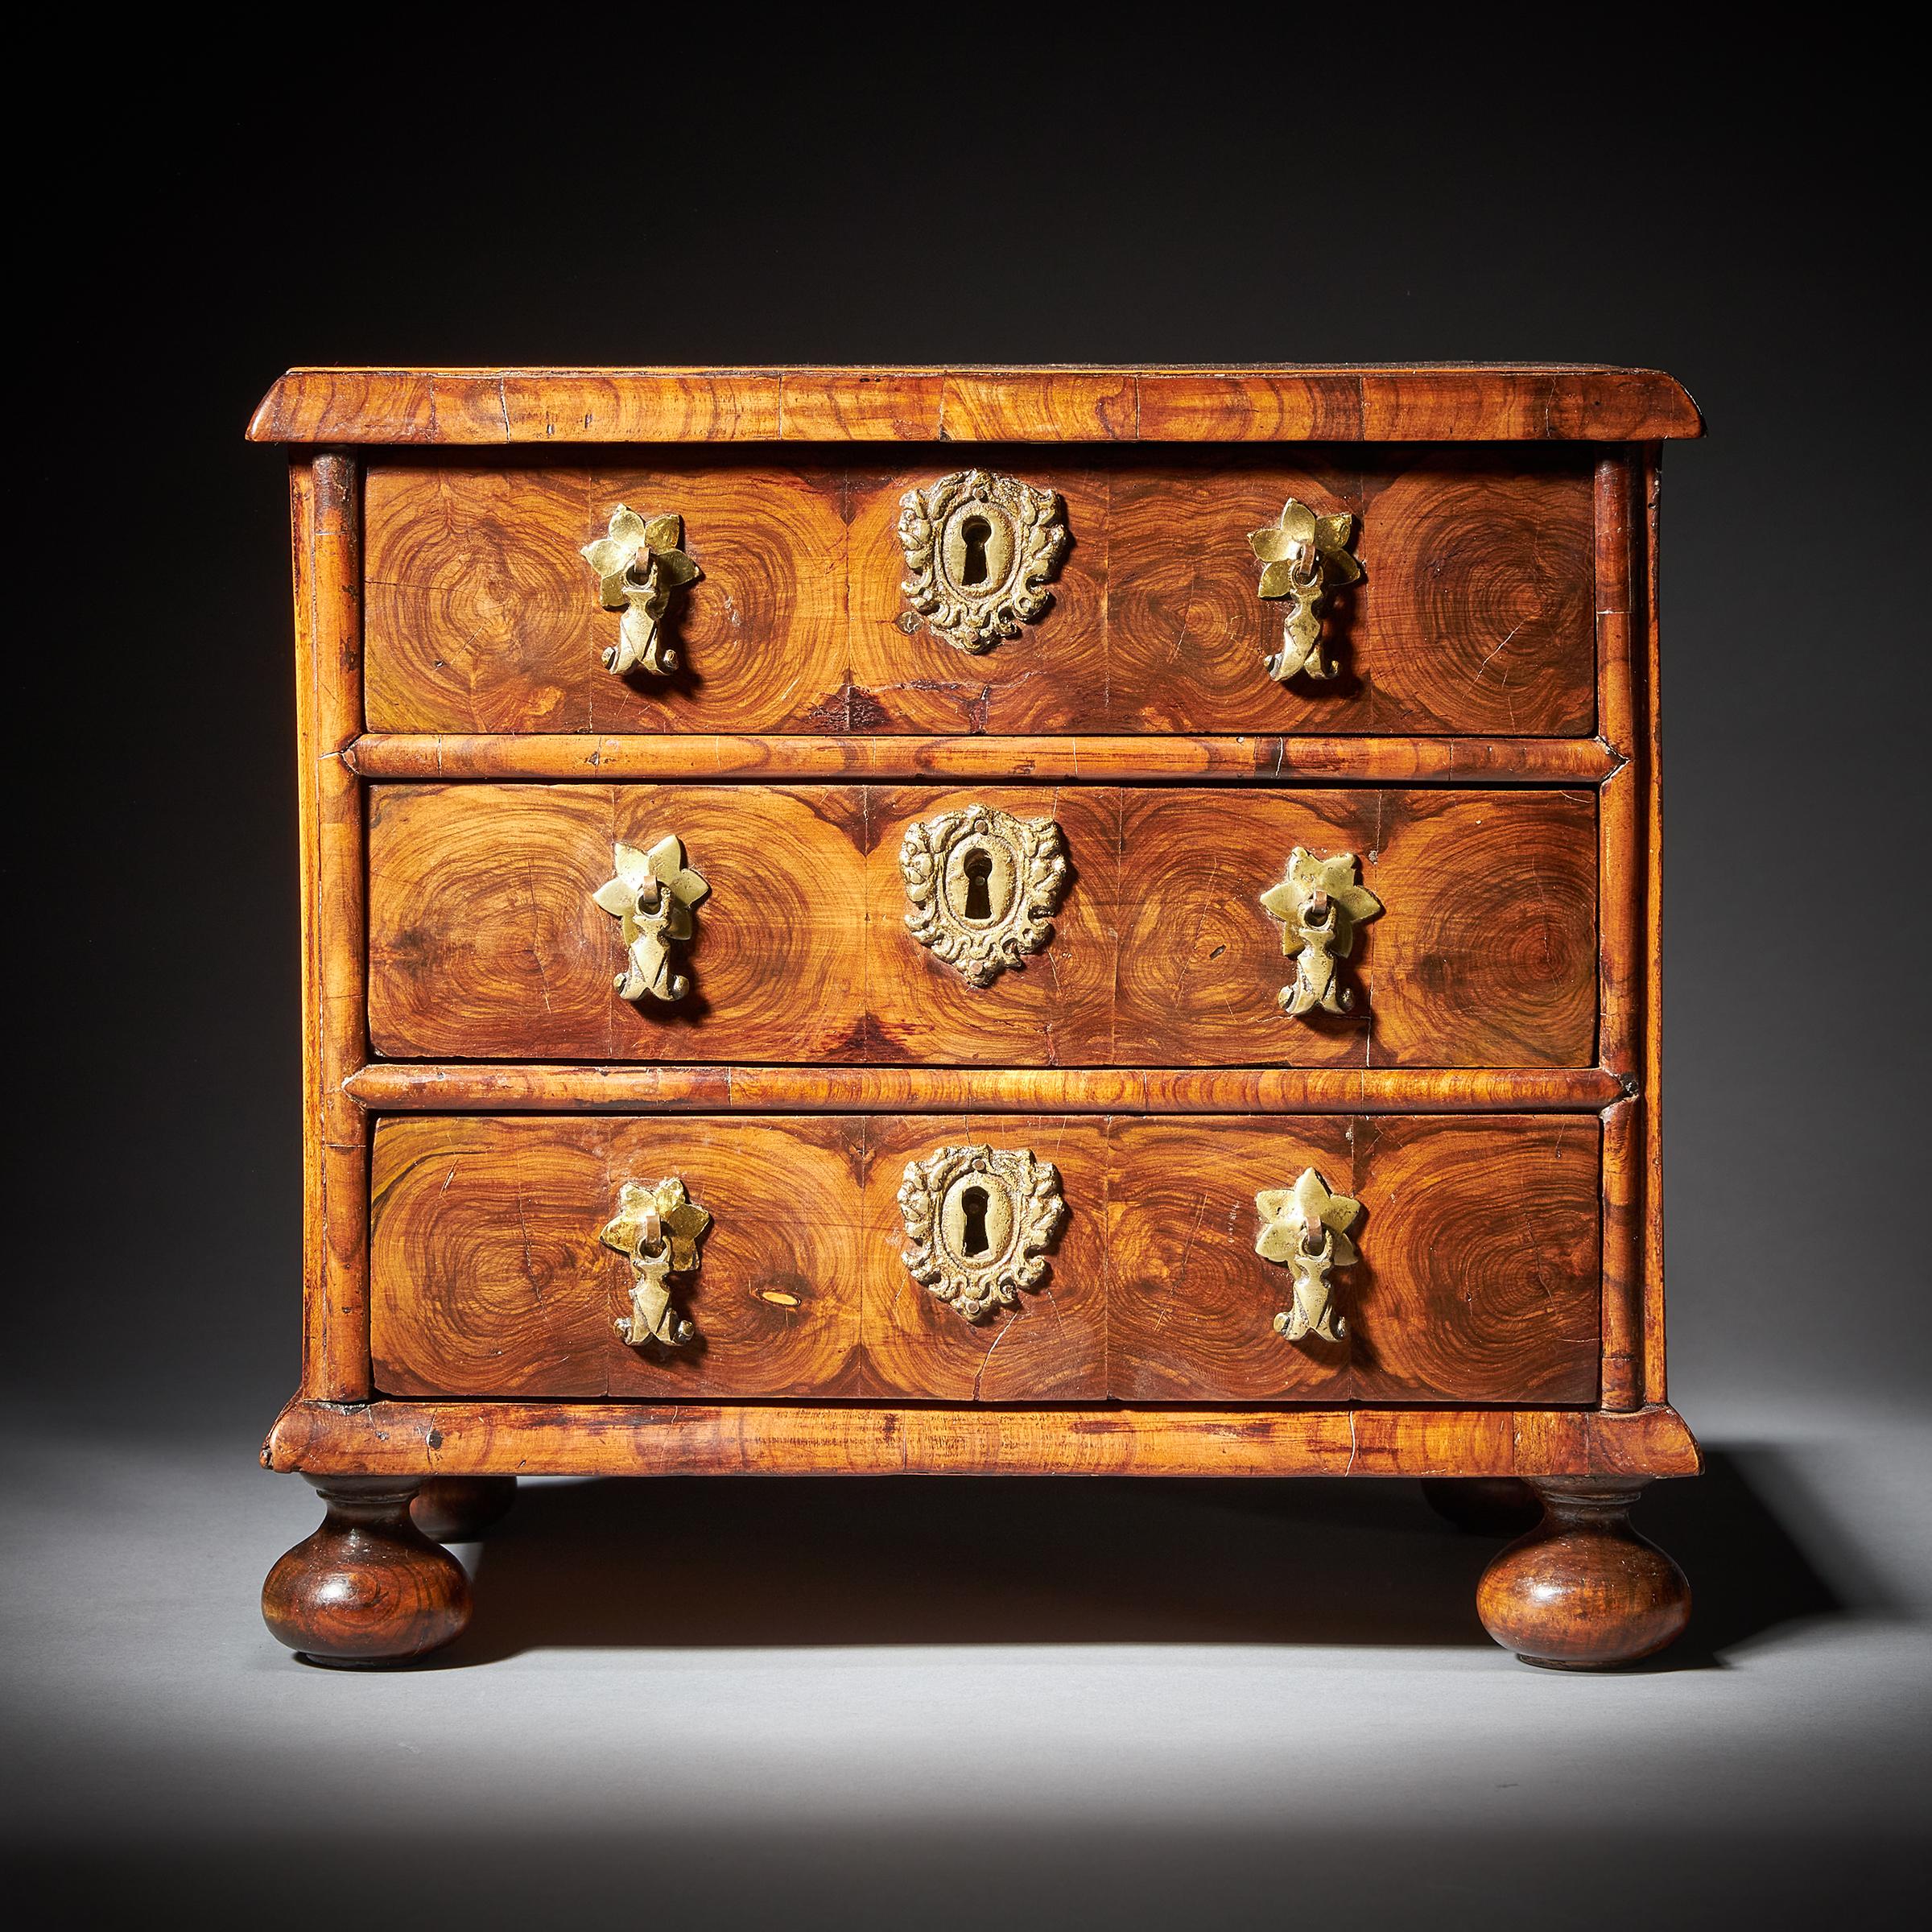 From the reign of King William & Queen Mary (1688-1702), England.

The finely holly-banded and cross-grain moulded top is beautifully veneered in roundels of hand-cut olive oysters and lined in boxwood stringing in a geometric form. Over three